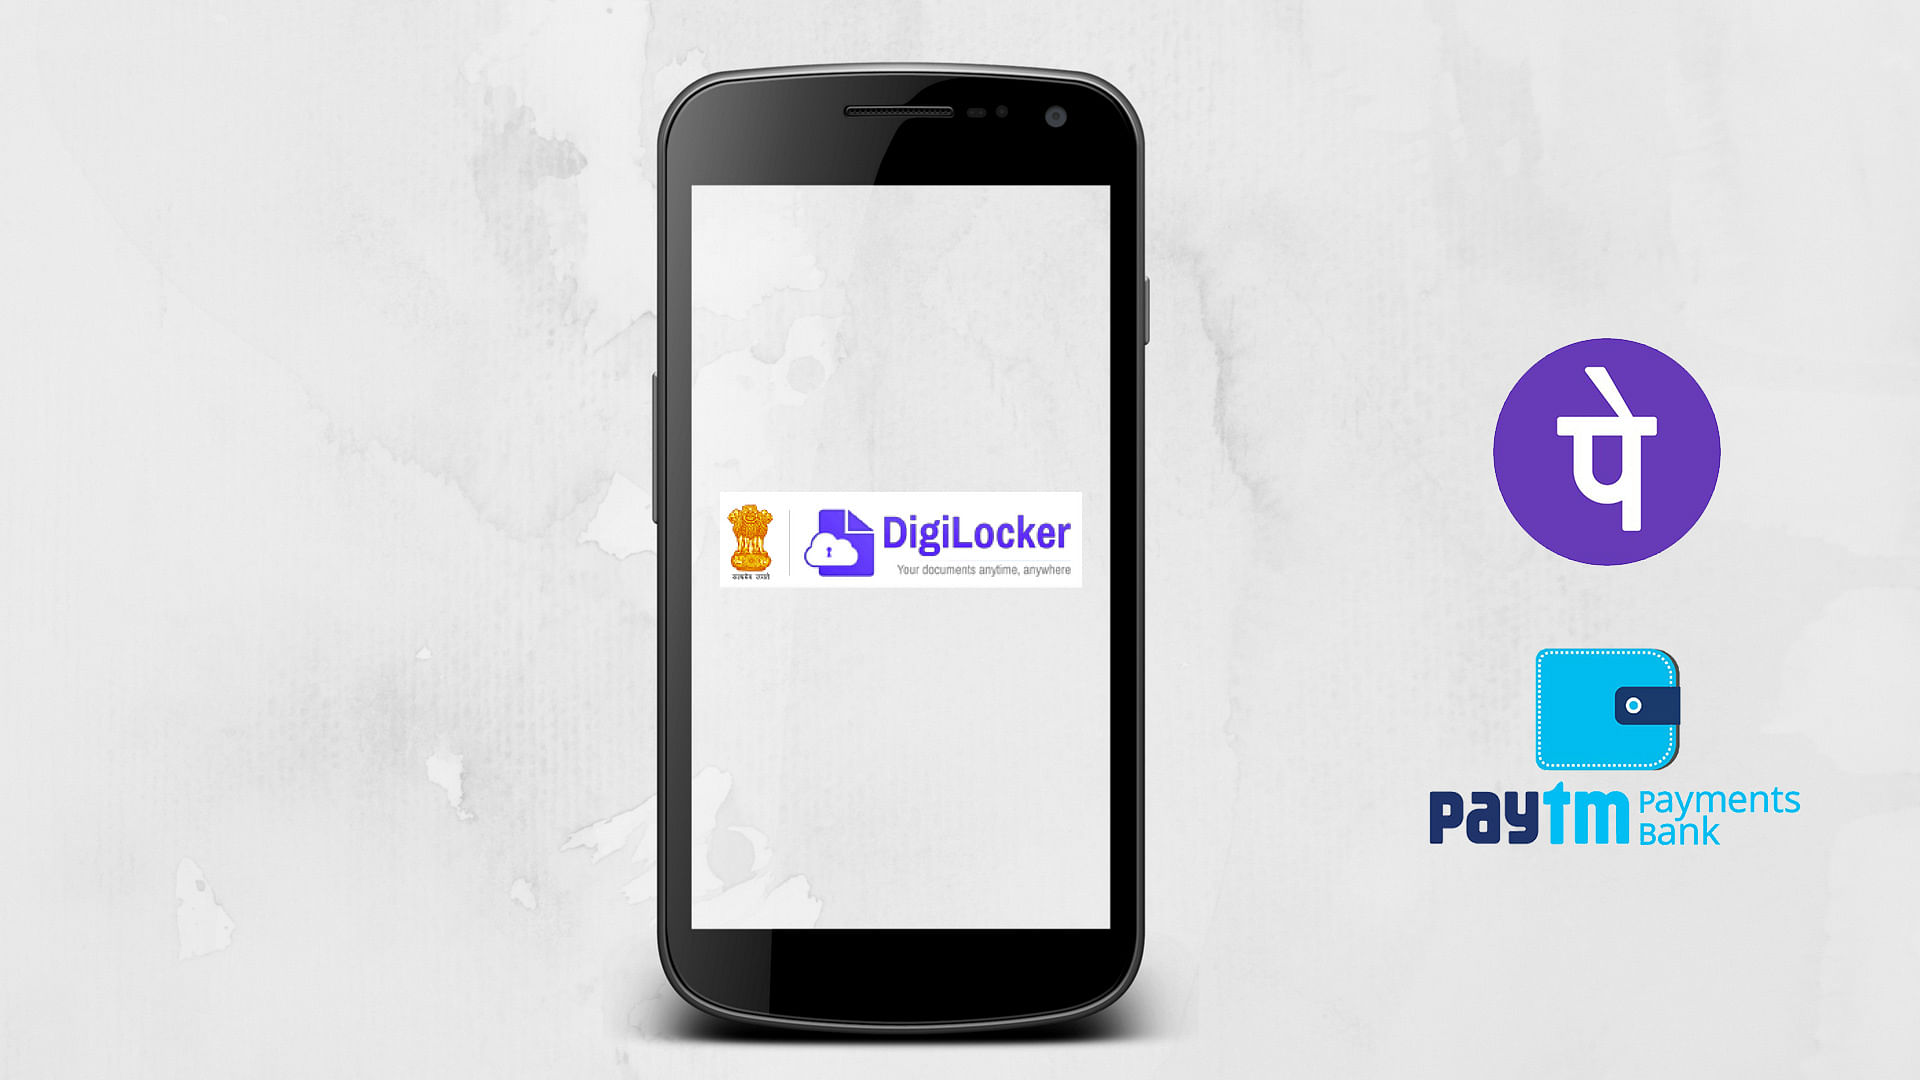 Documents in DigiLocker can be used for e-KYC purposes.